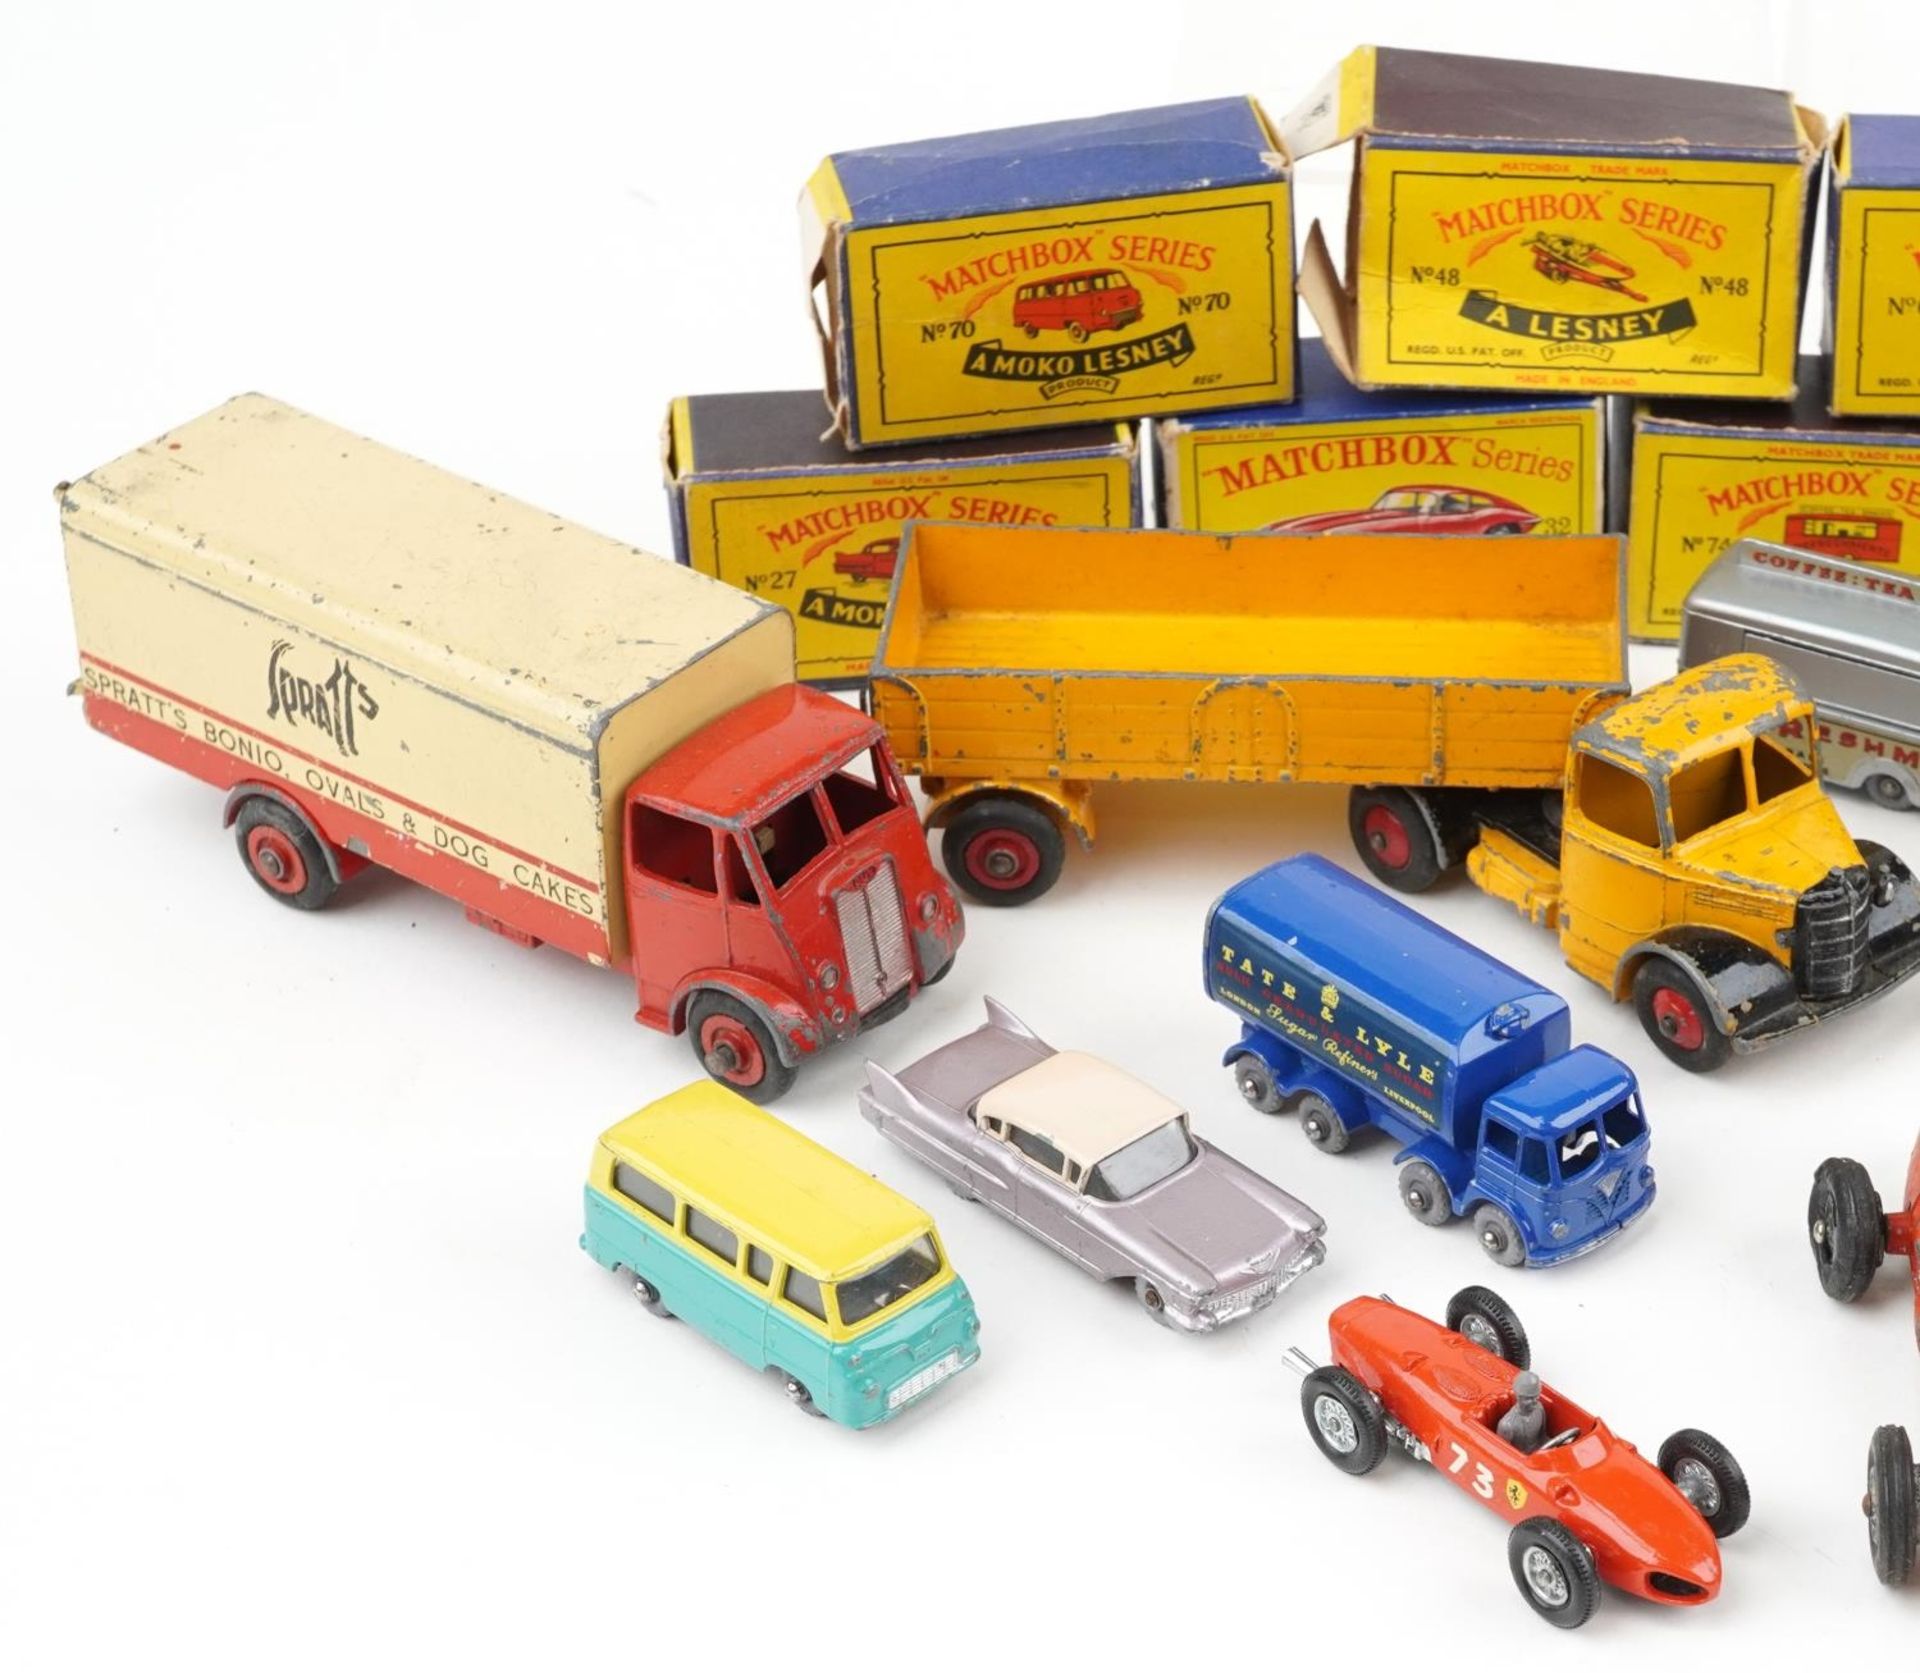 Vintage diecast vehicles, some with boxes, including Matchbox Series, Timpo Toys, Dinky Supertoys - Image 2 of 3